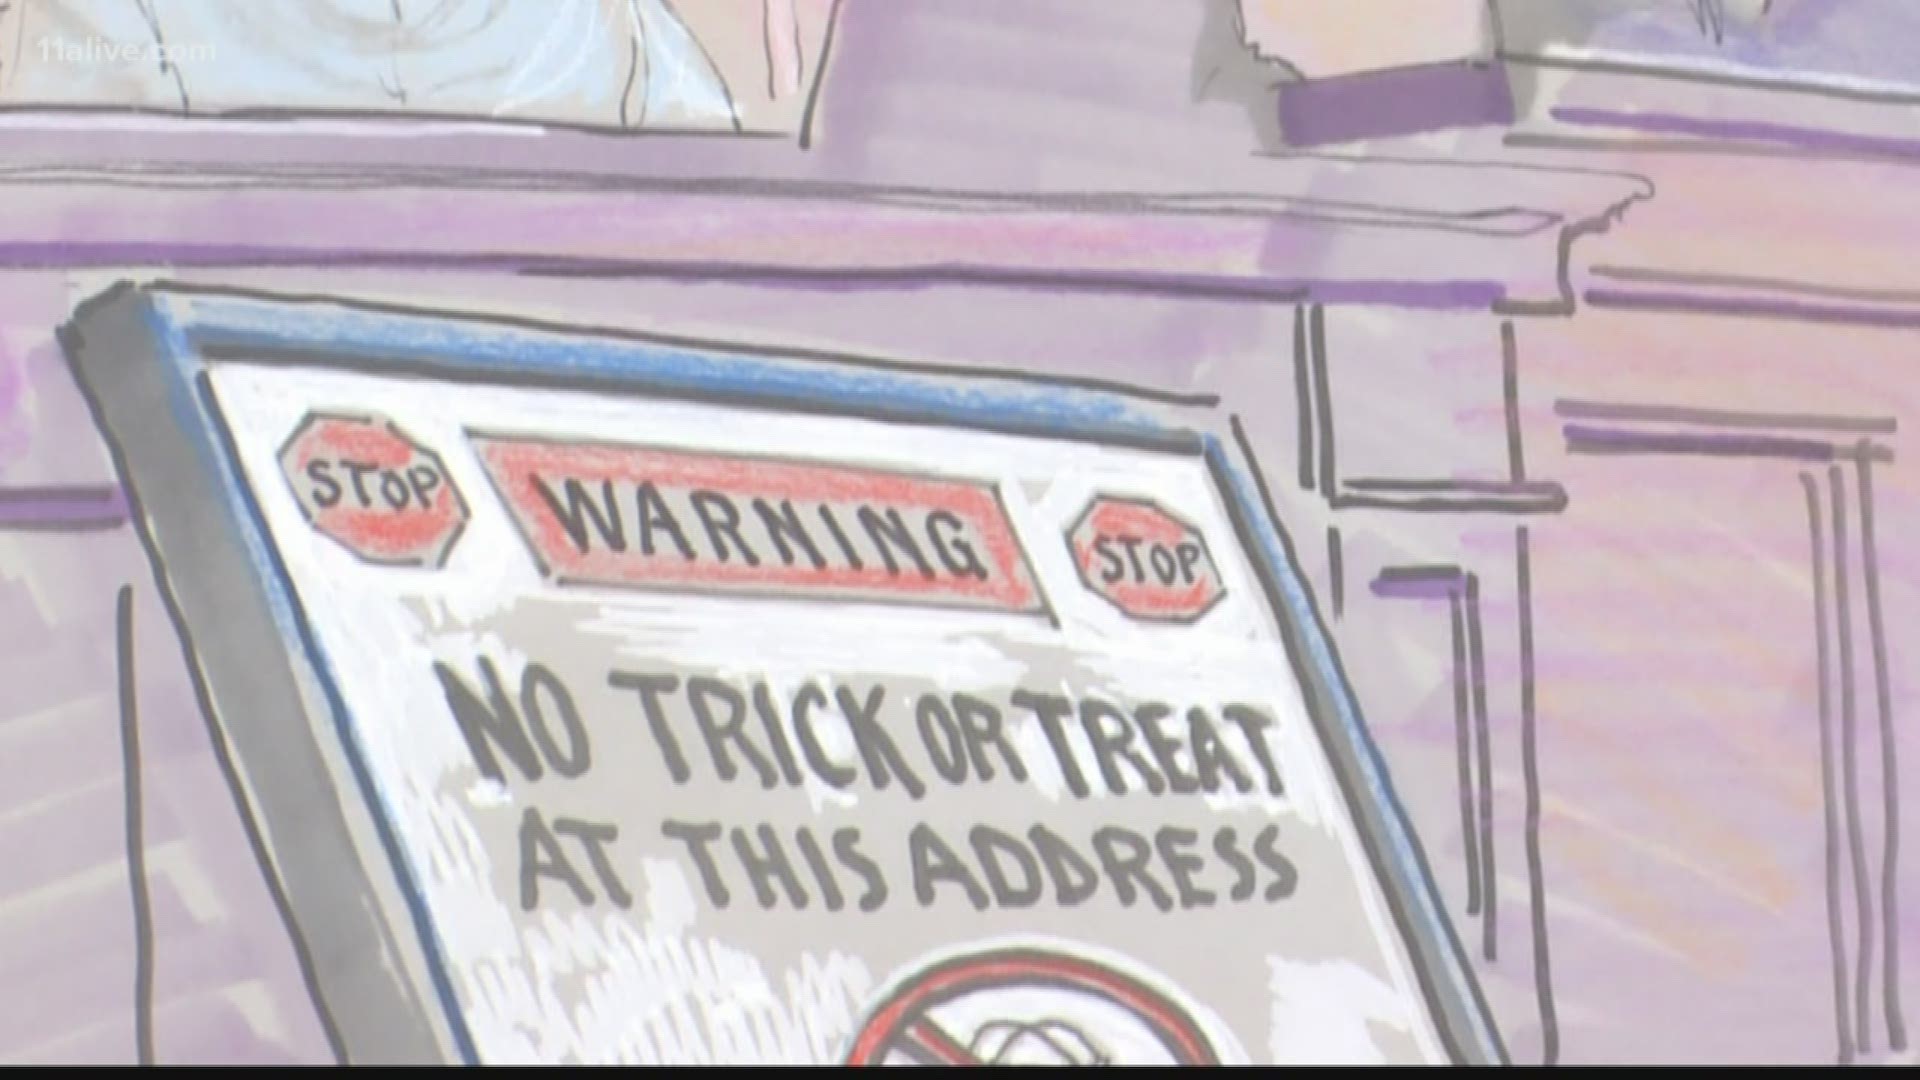 Judge Hears Sex Offenders Lawsuit On No Trick Or Treat Signs